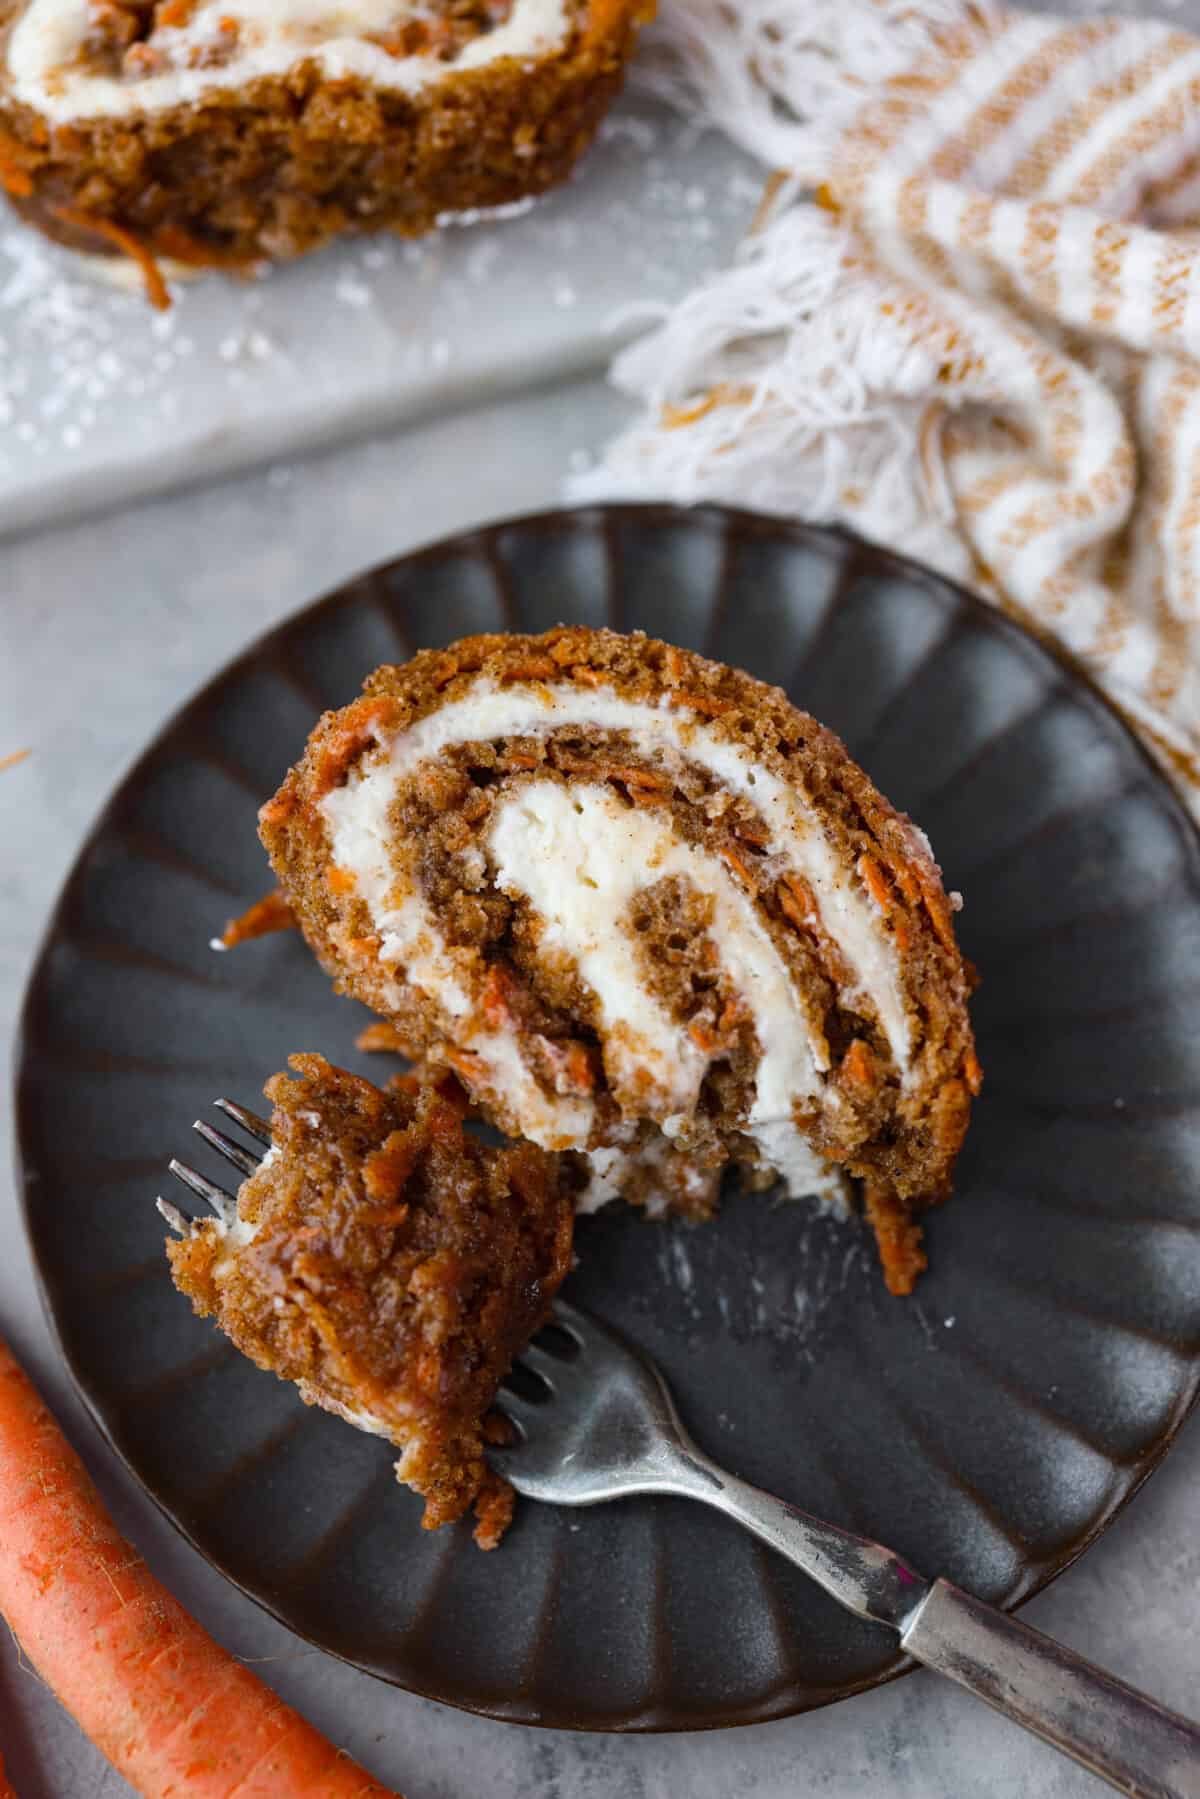 Taking a bite of cake that was served on a black plate. - Carrot Cake Roll